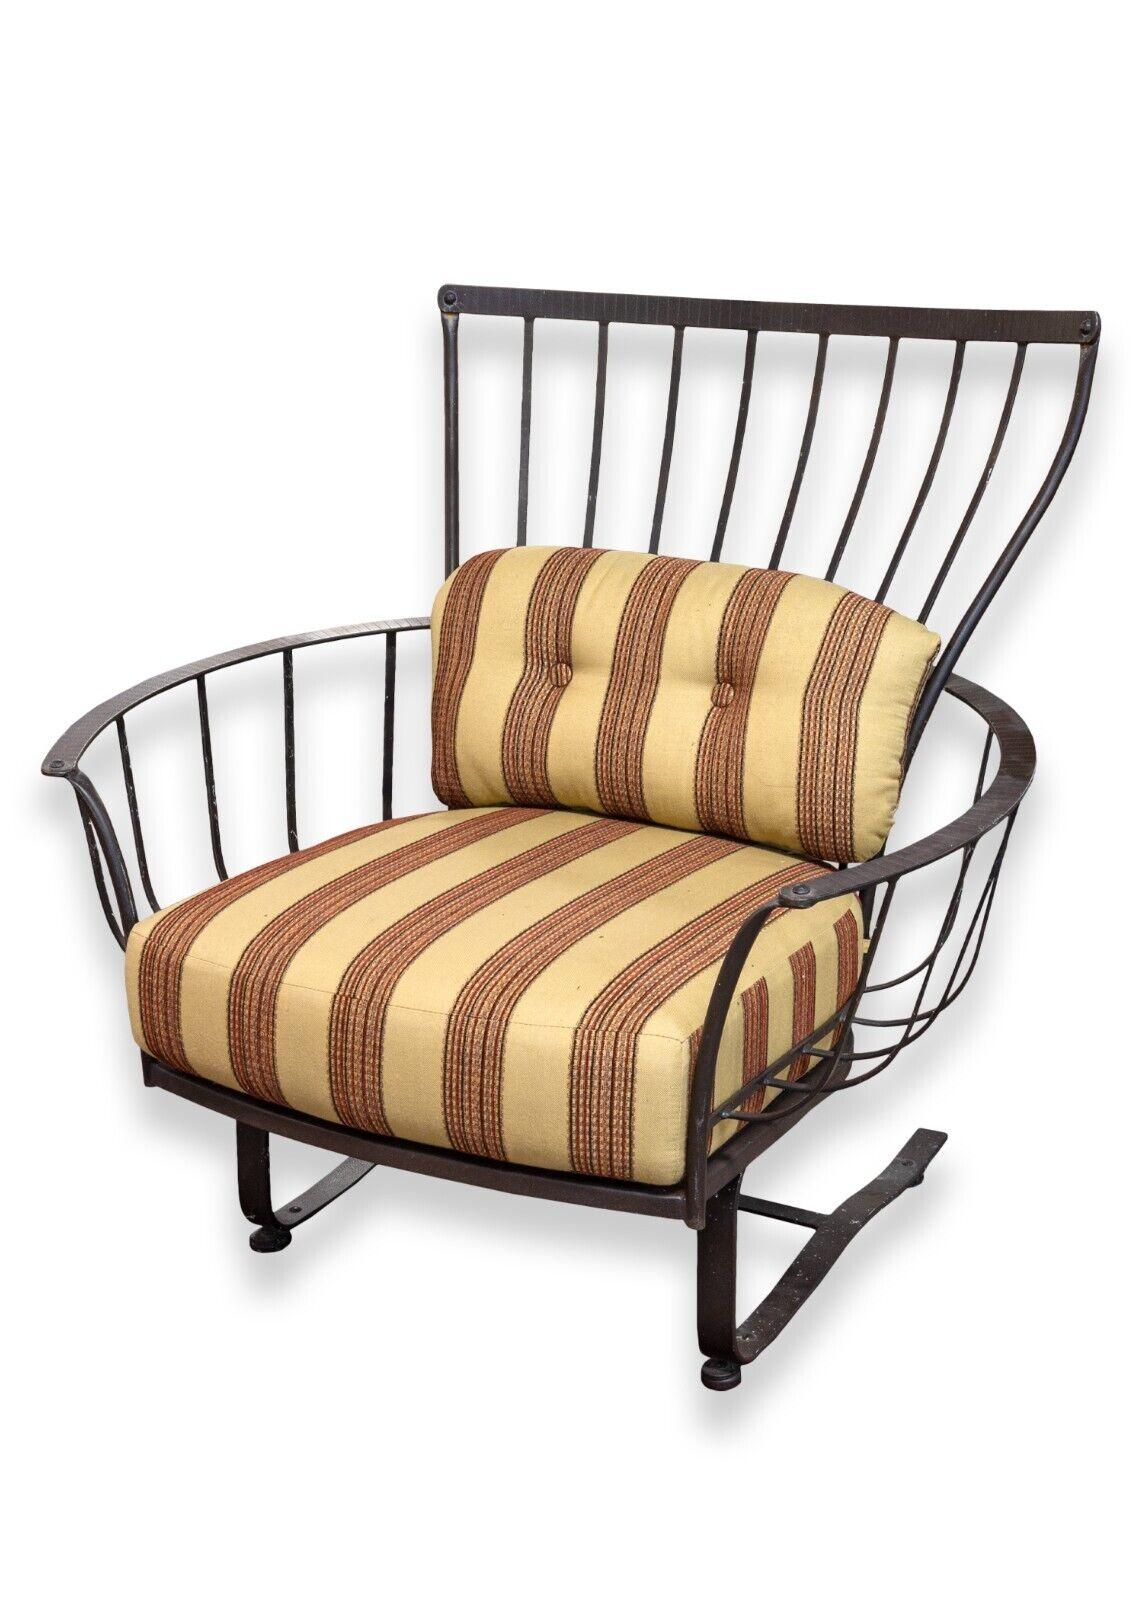 Vintage pair of OW Lee wrought iron oversized patio rocking chairs with cushions. This a lovely and unique set of patio rocking chairs. These chair feature a black wrought iron construction with included original brown cushions. These chairs have a